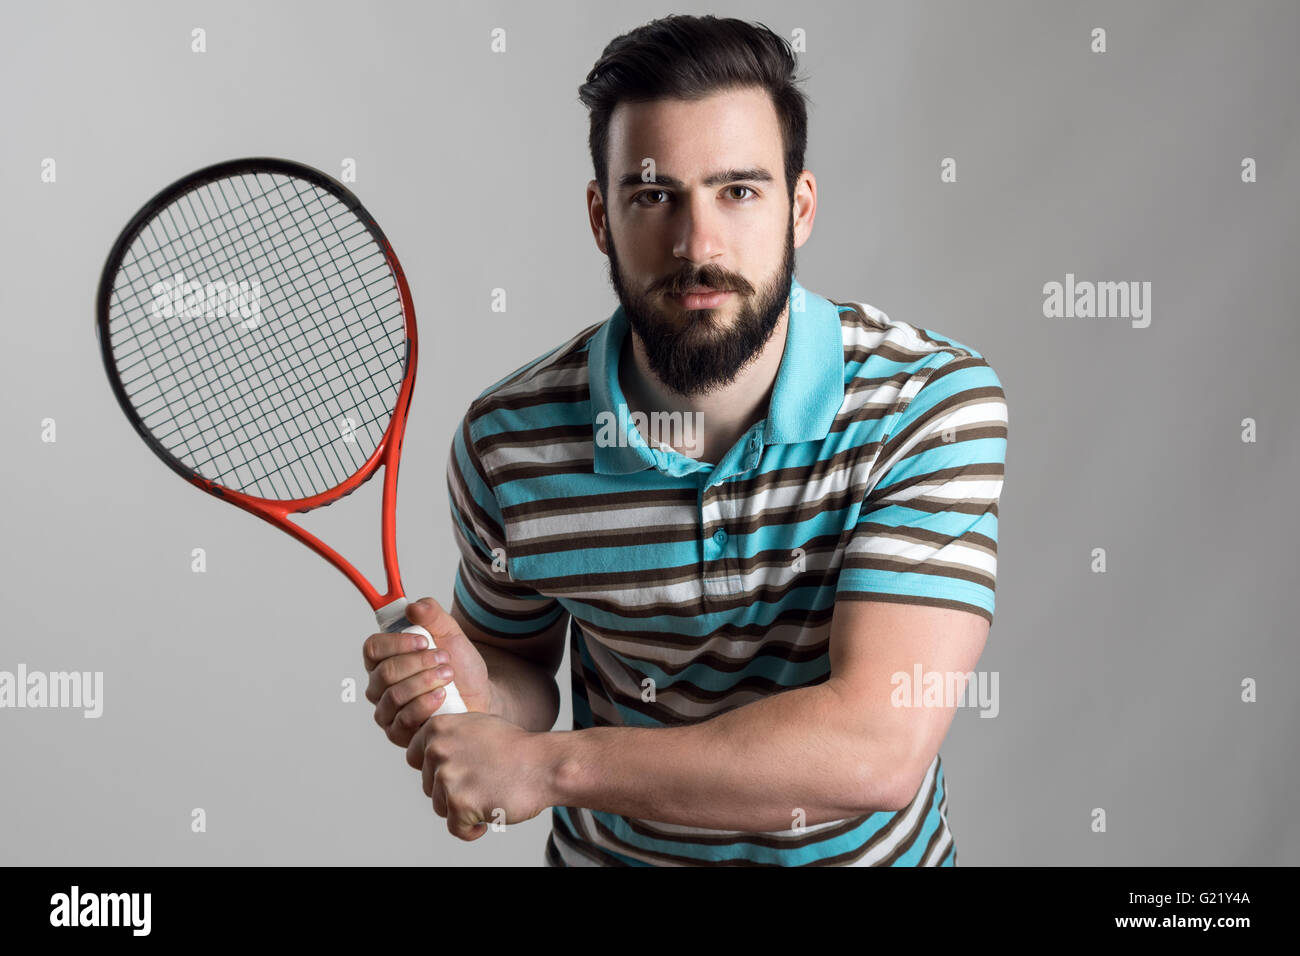 Concentrated tennis player in polo shirt holding racket with both hands ...